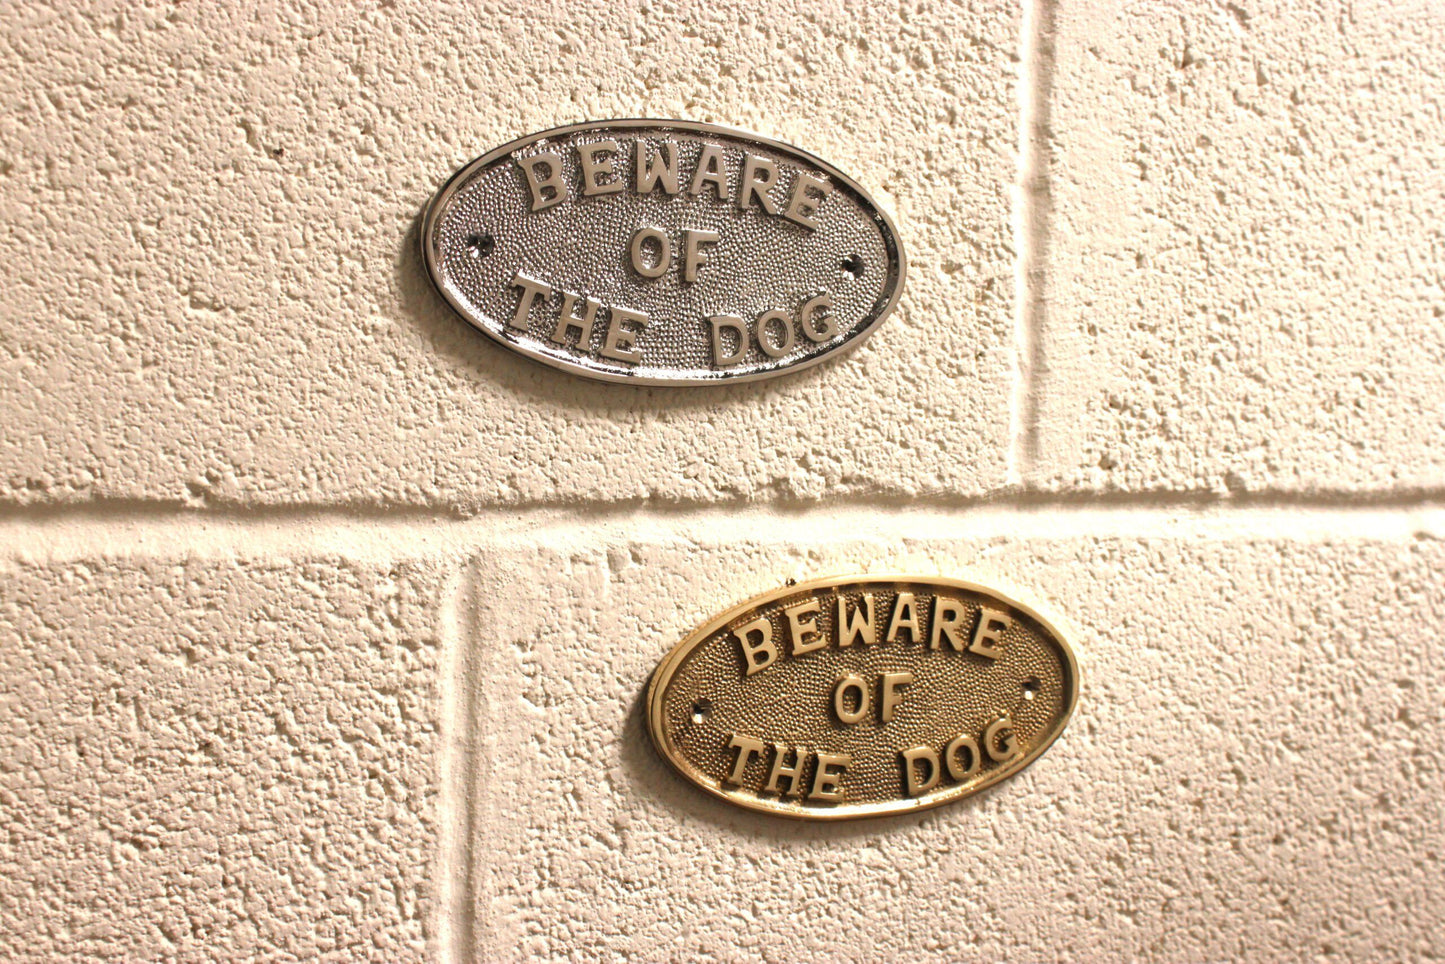 BEWARE OF THE DOG  - POLISHED NICKEL